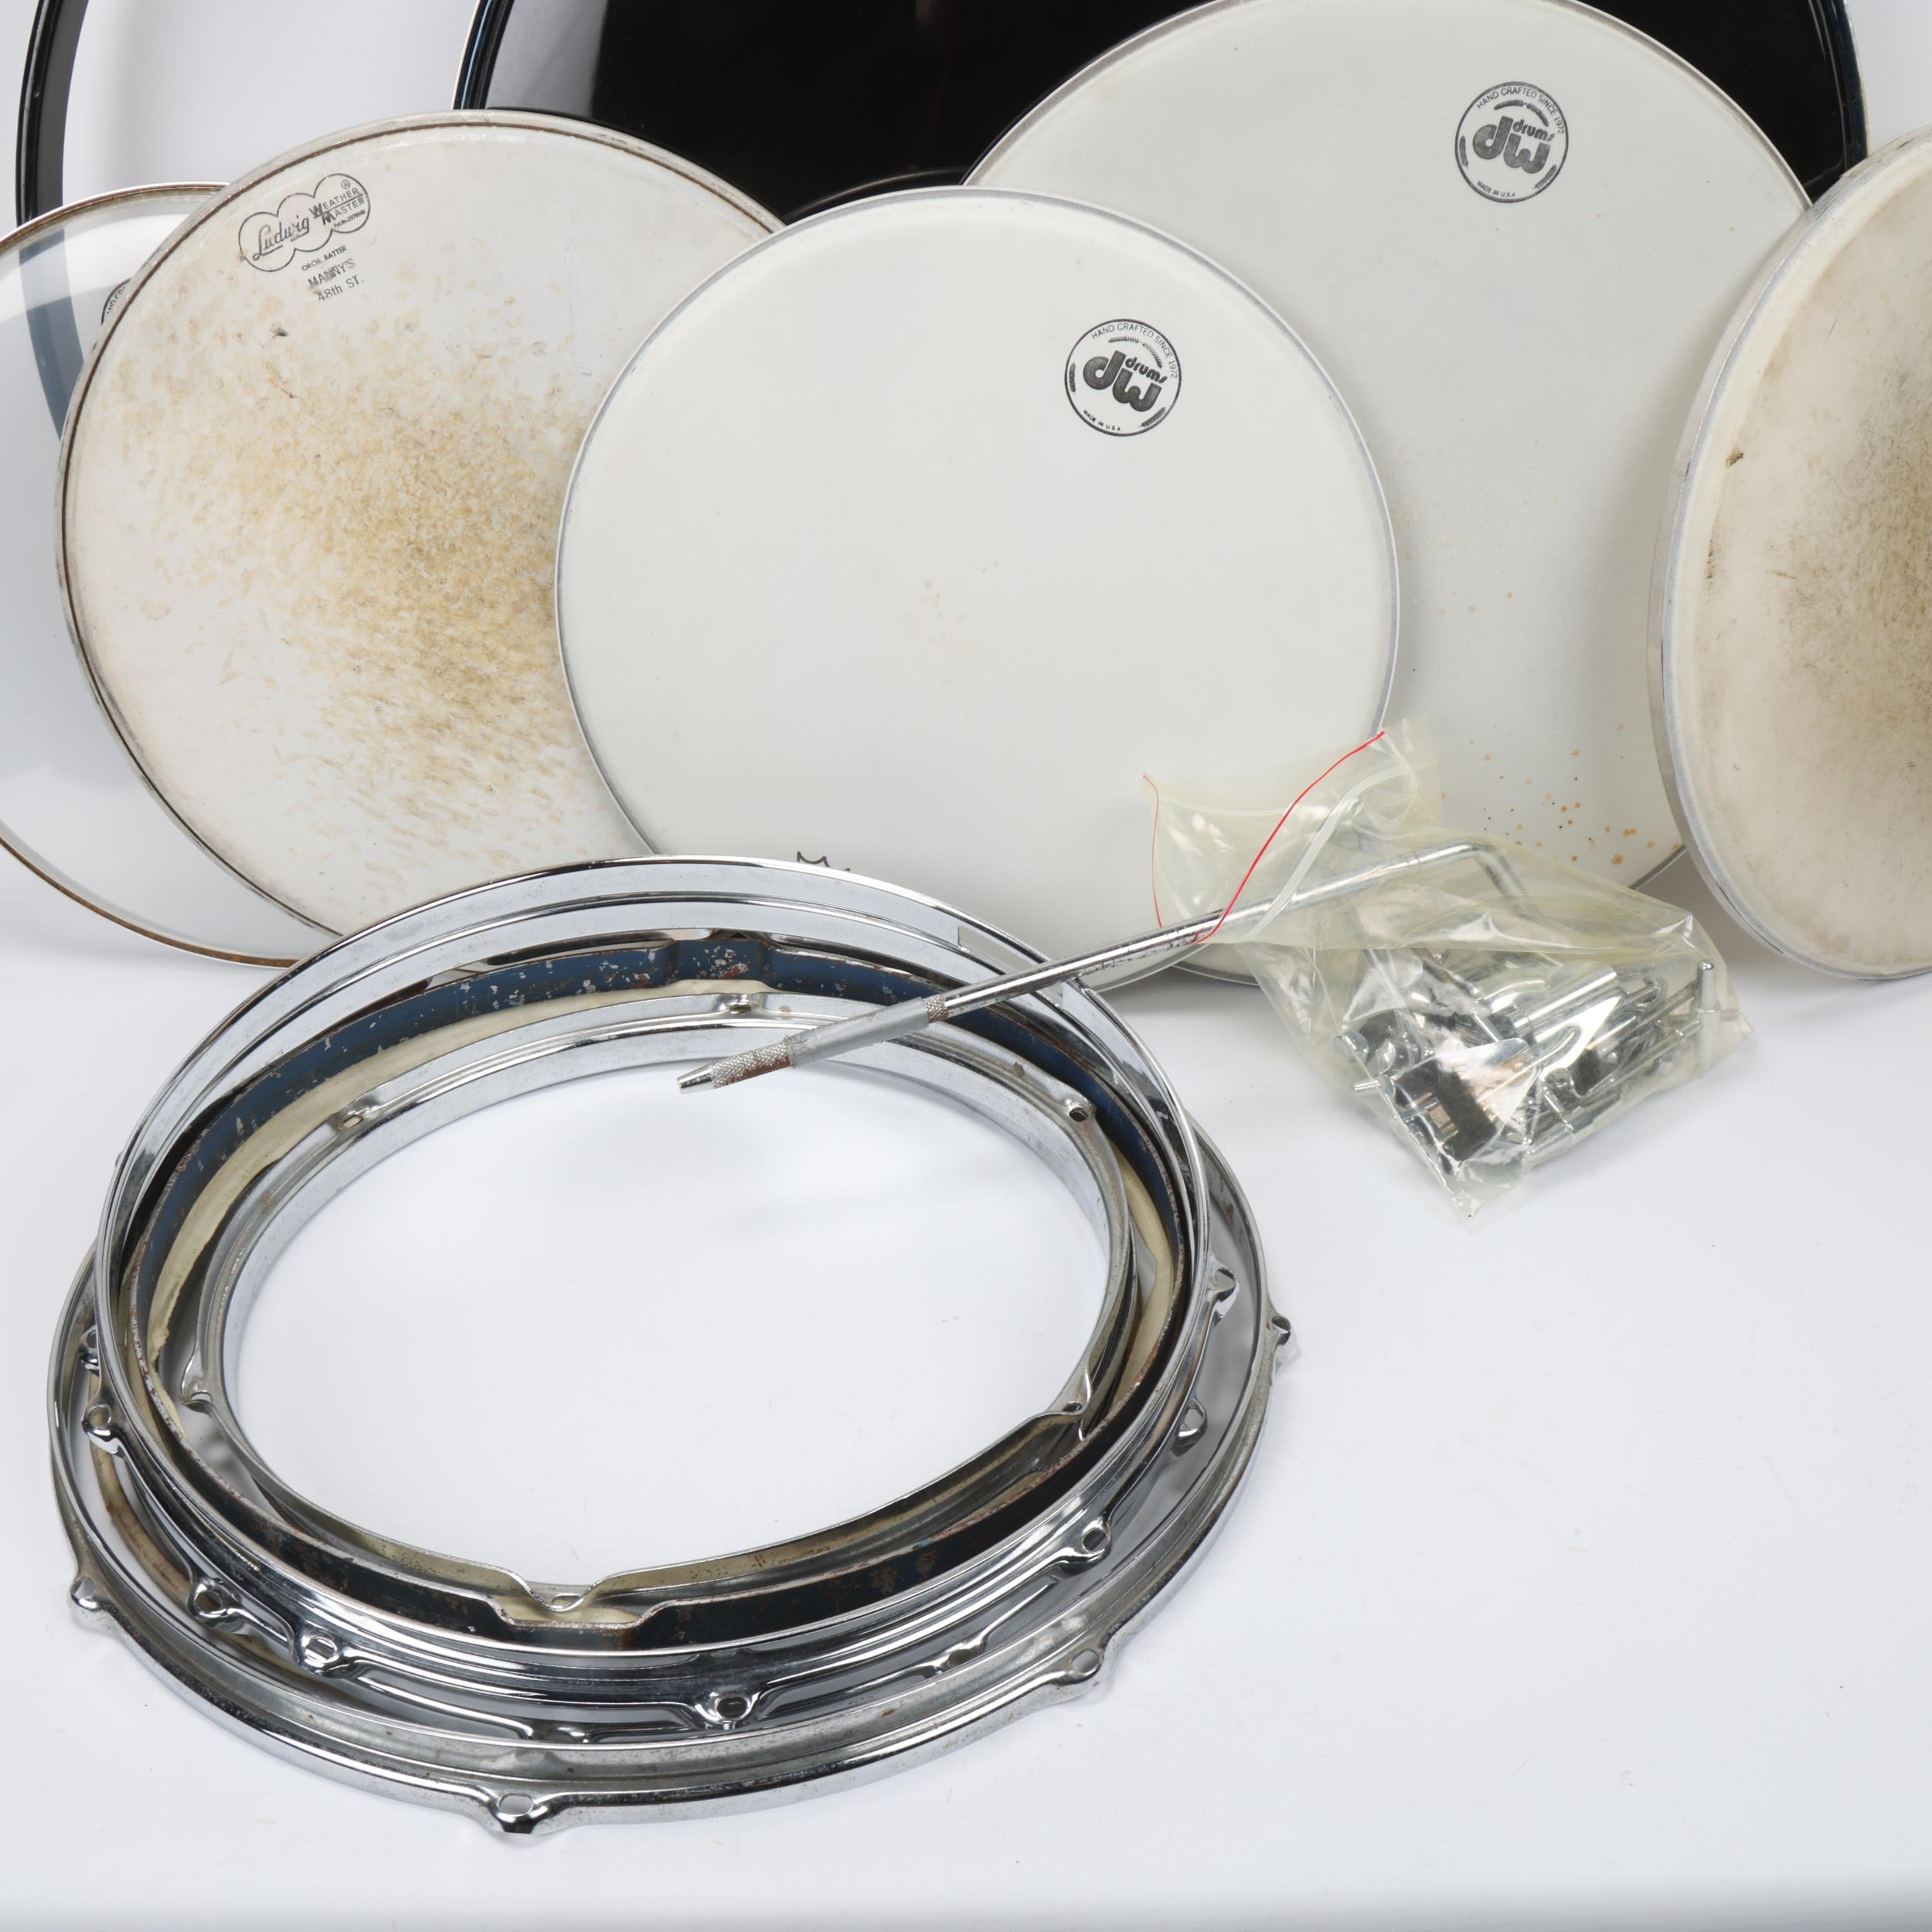 A selection of used DRUM SKINS & RIMS that belonged to MITCH MITCHELL of the JIMI HENDRIX - Image 3 of 3